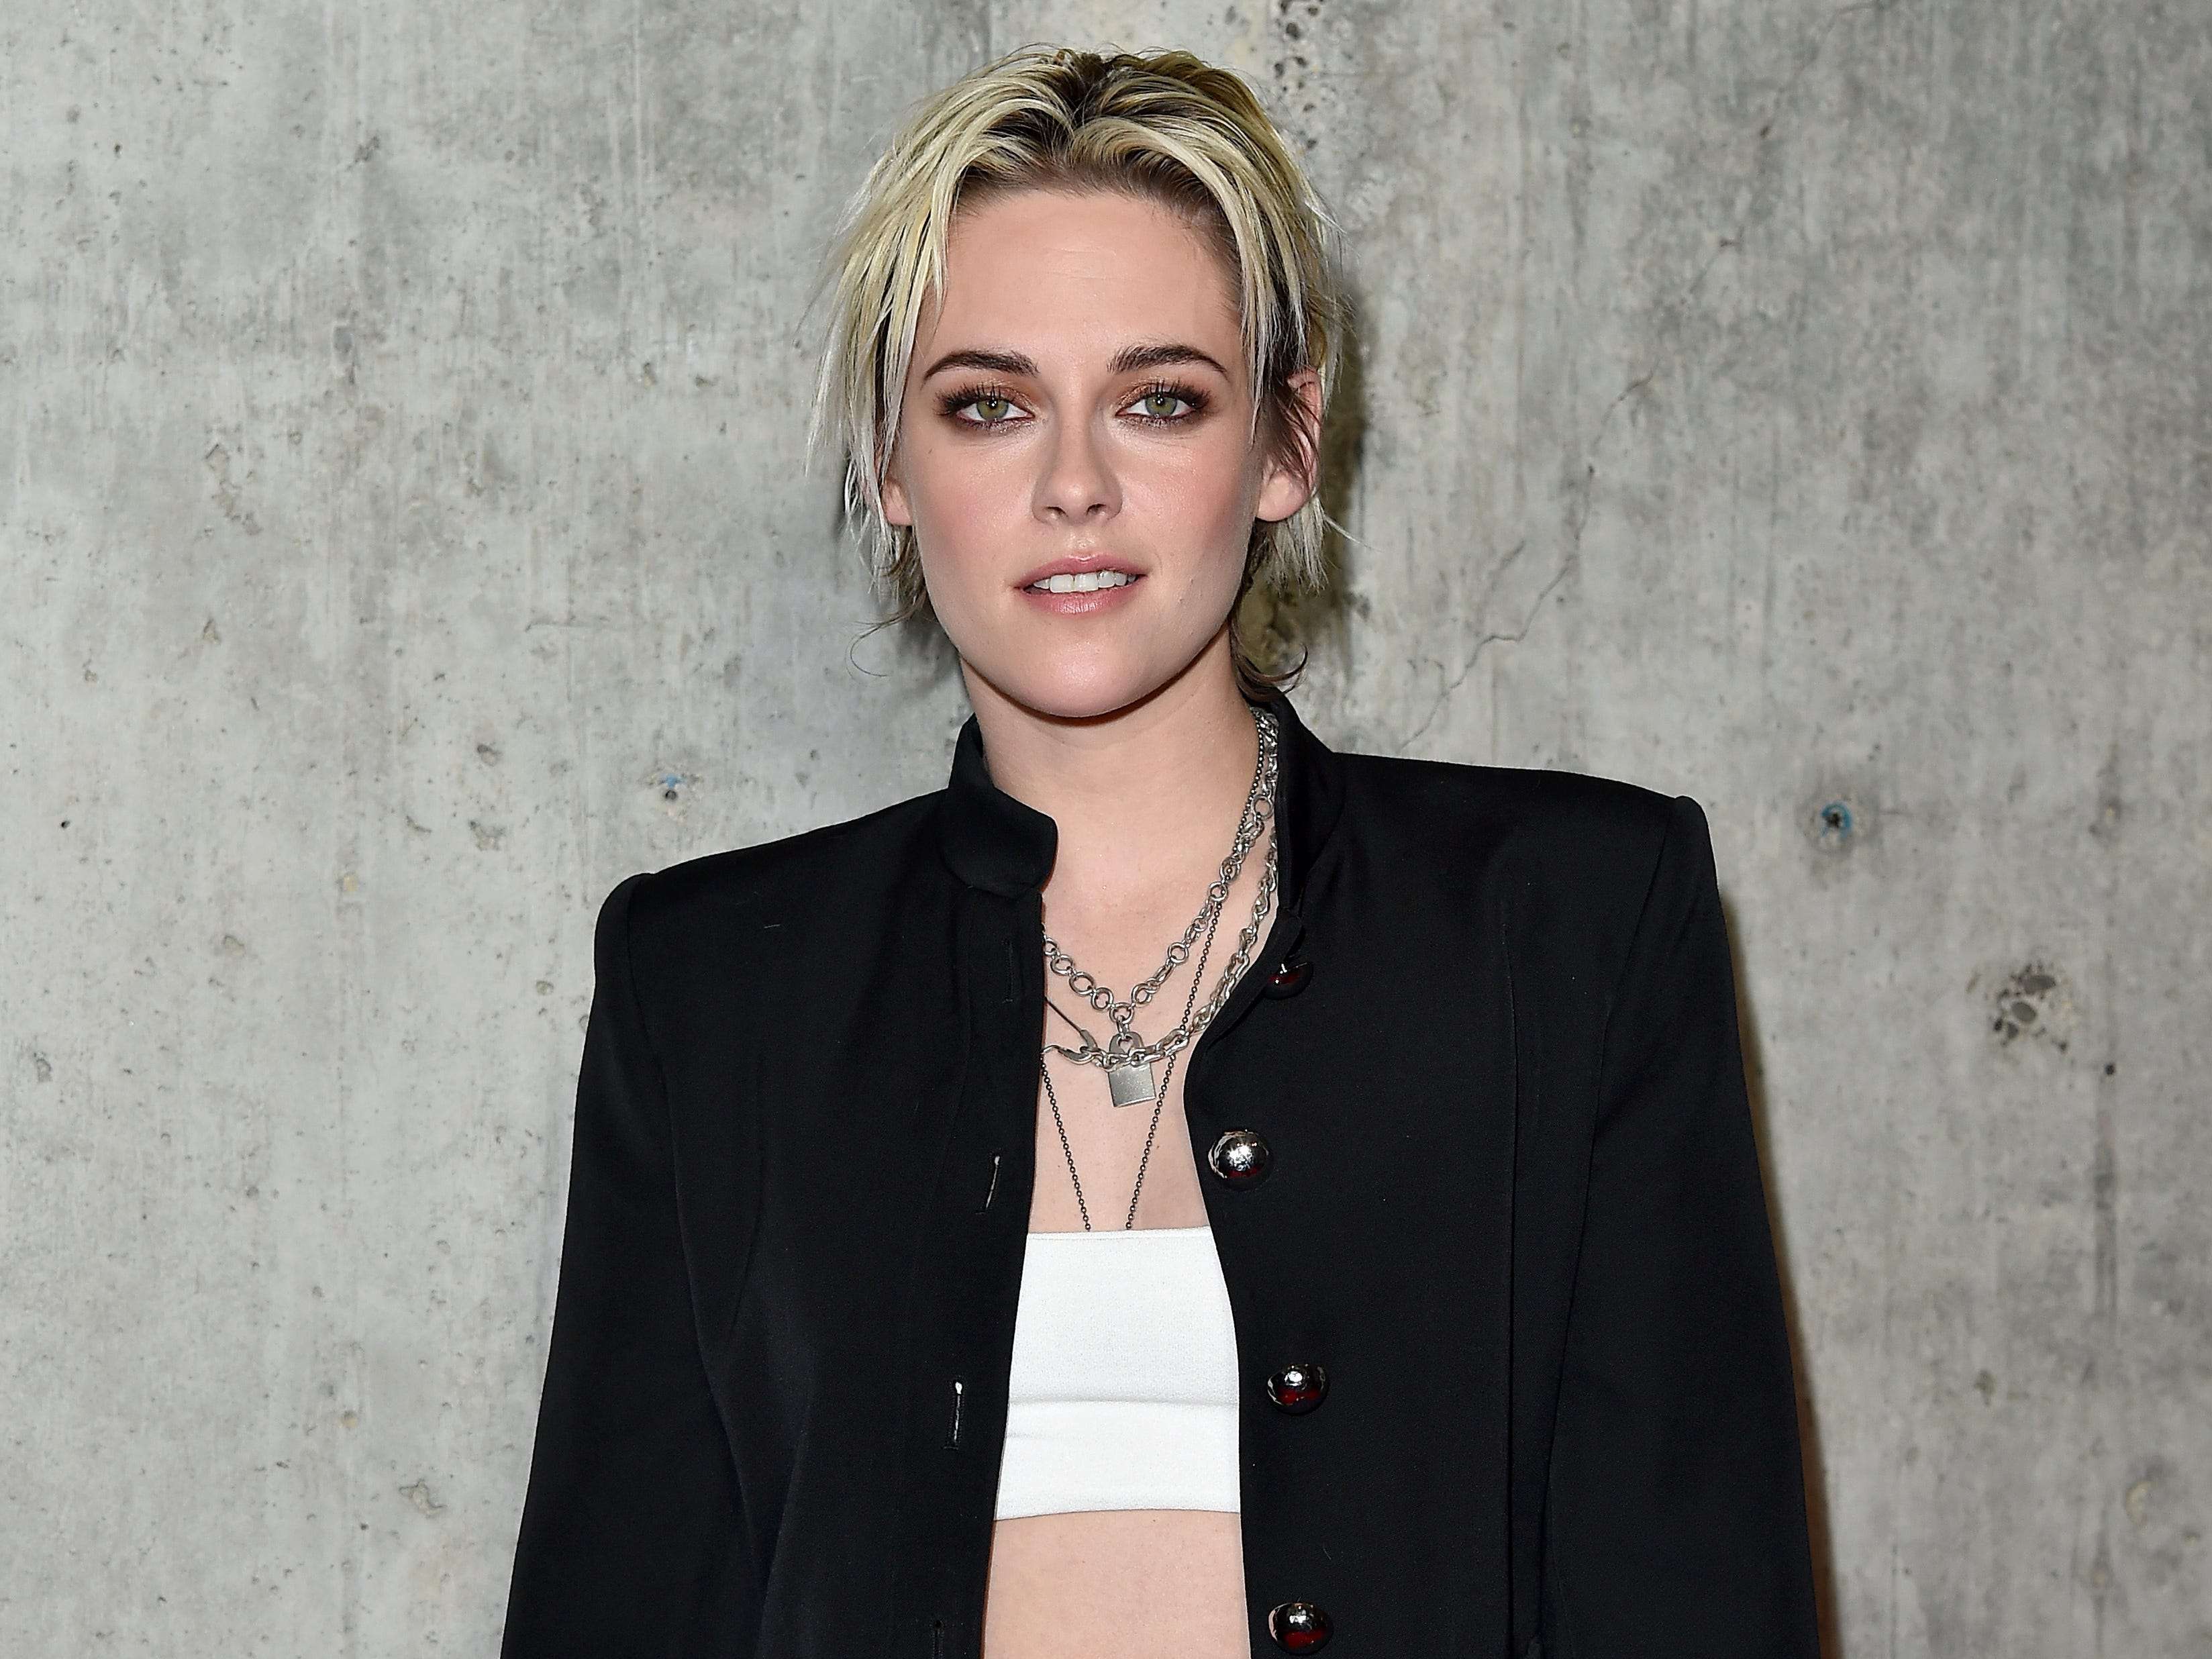 Kristen Stewart Explains How Being Hounded About Labeling Her Sexuality Affected Her When She